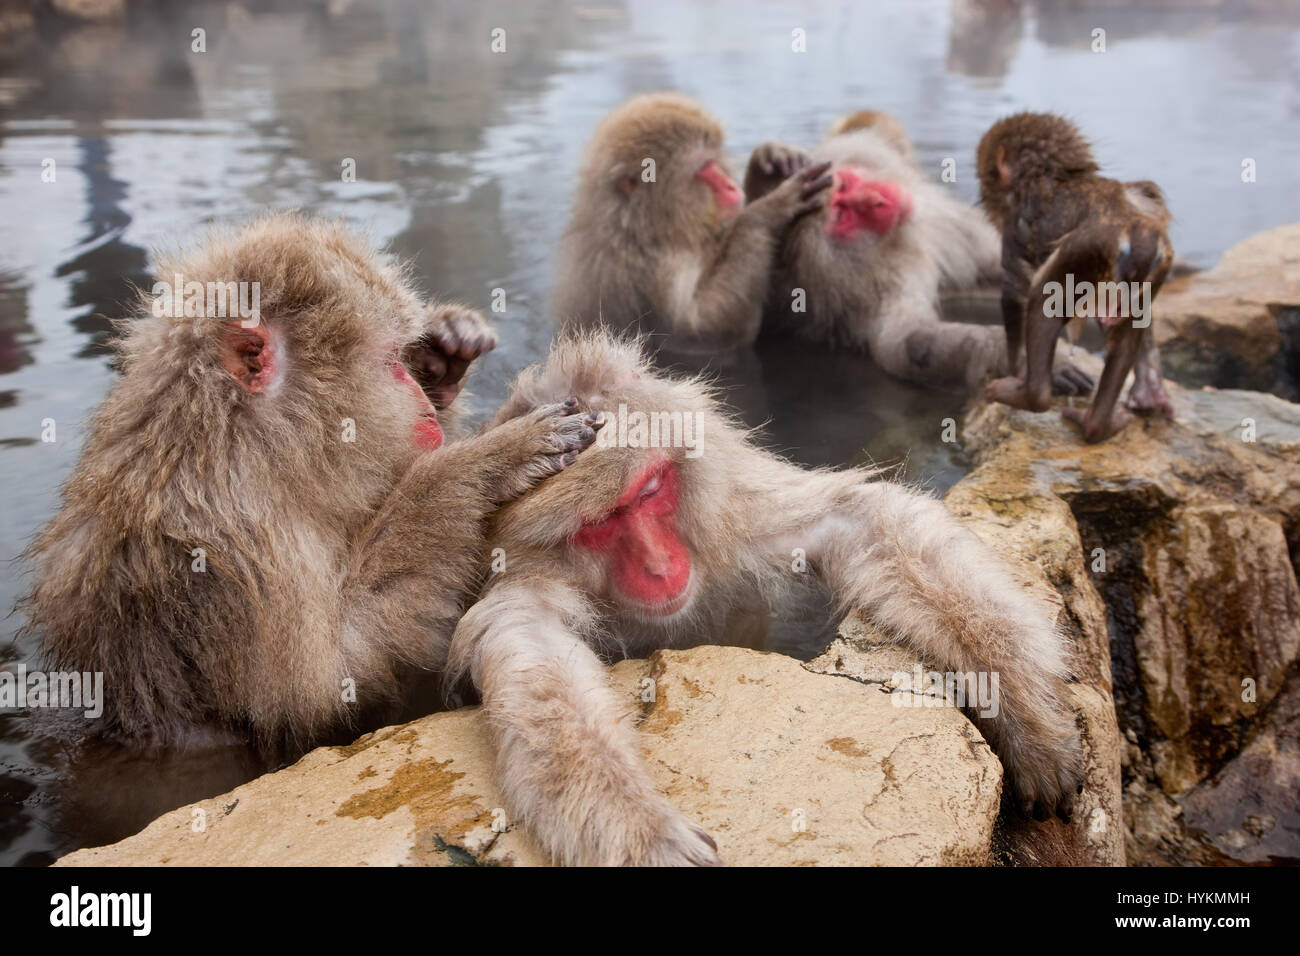 NAGANO, JAPAN: THIS group of 200 monkeys and their babies captured by a passing British photographer must be the luckiest on the planet. Basking  all day in the warm waters of the hot springs in the nature sanctuary they call home has left these Japanese macaques with little to do but soak themselves and groom each other all day. Other cute pictures show how the cute baby monkeys make the most of their charmed lives by taking a dip in the water with the adults. Travel photographer Peter Adams (55) from the Cotswolds took the quirky shots while visiting the Jigokudani Park in Nagano, Japan. Stock Photo